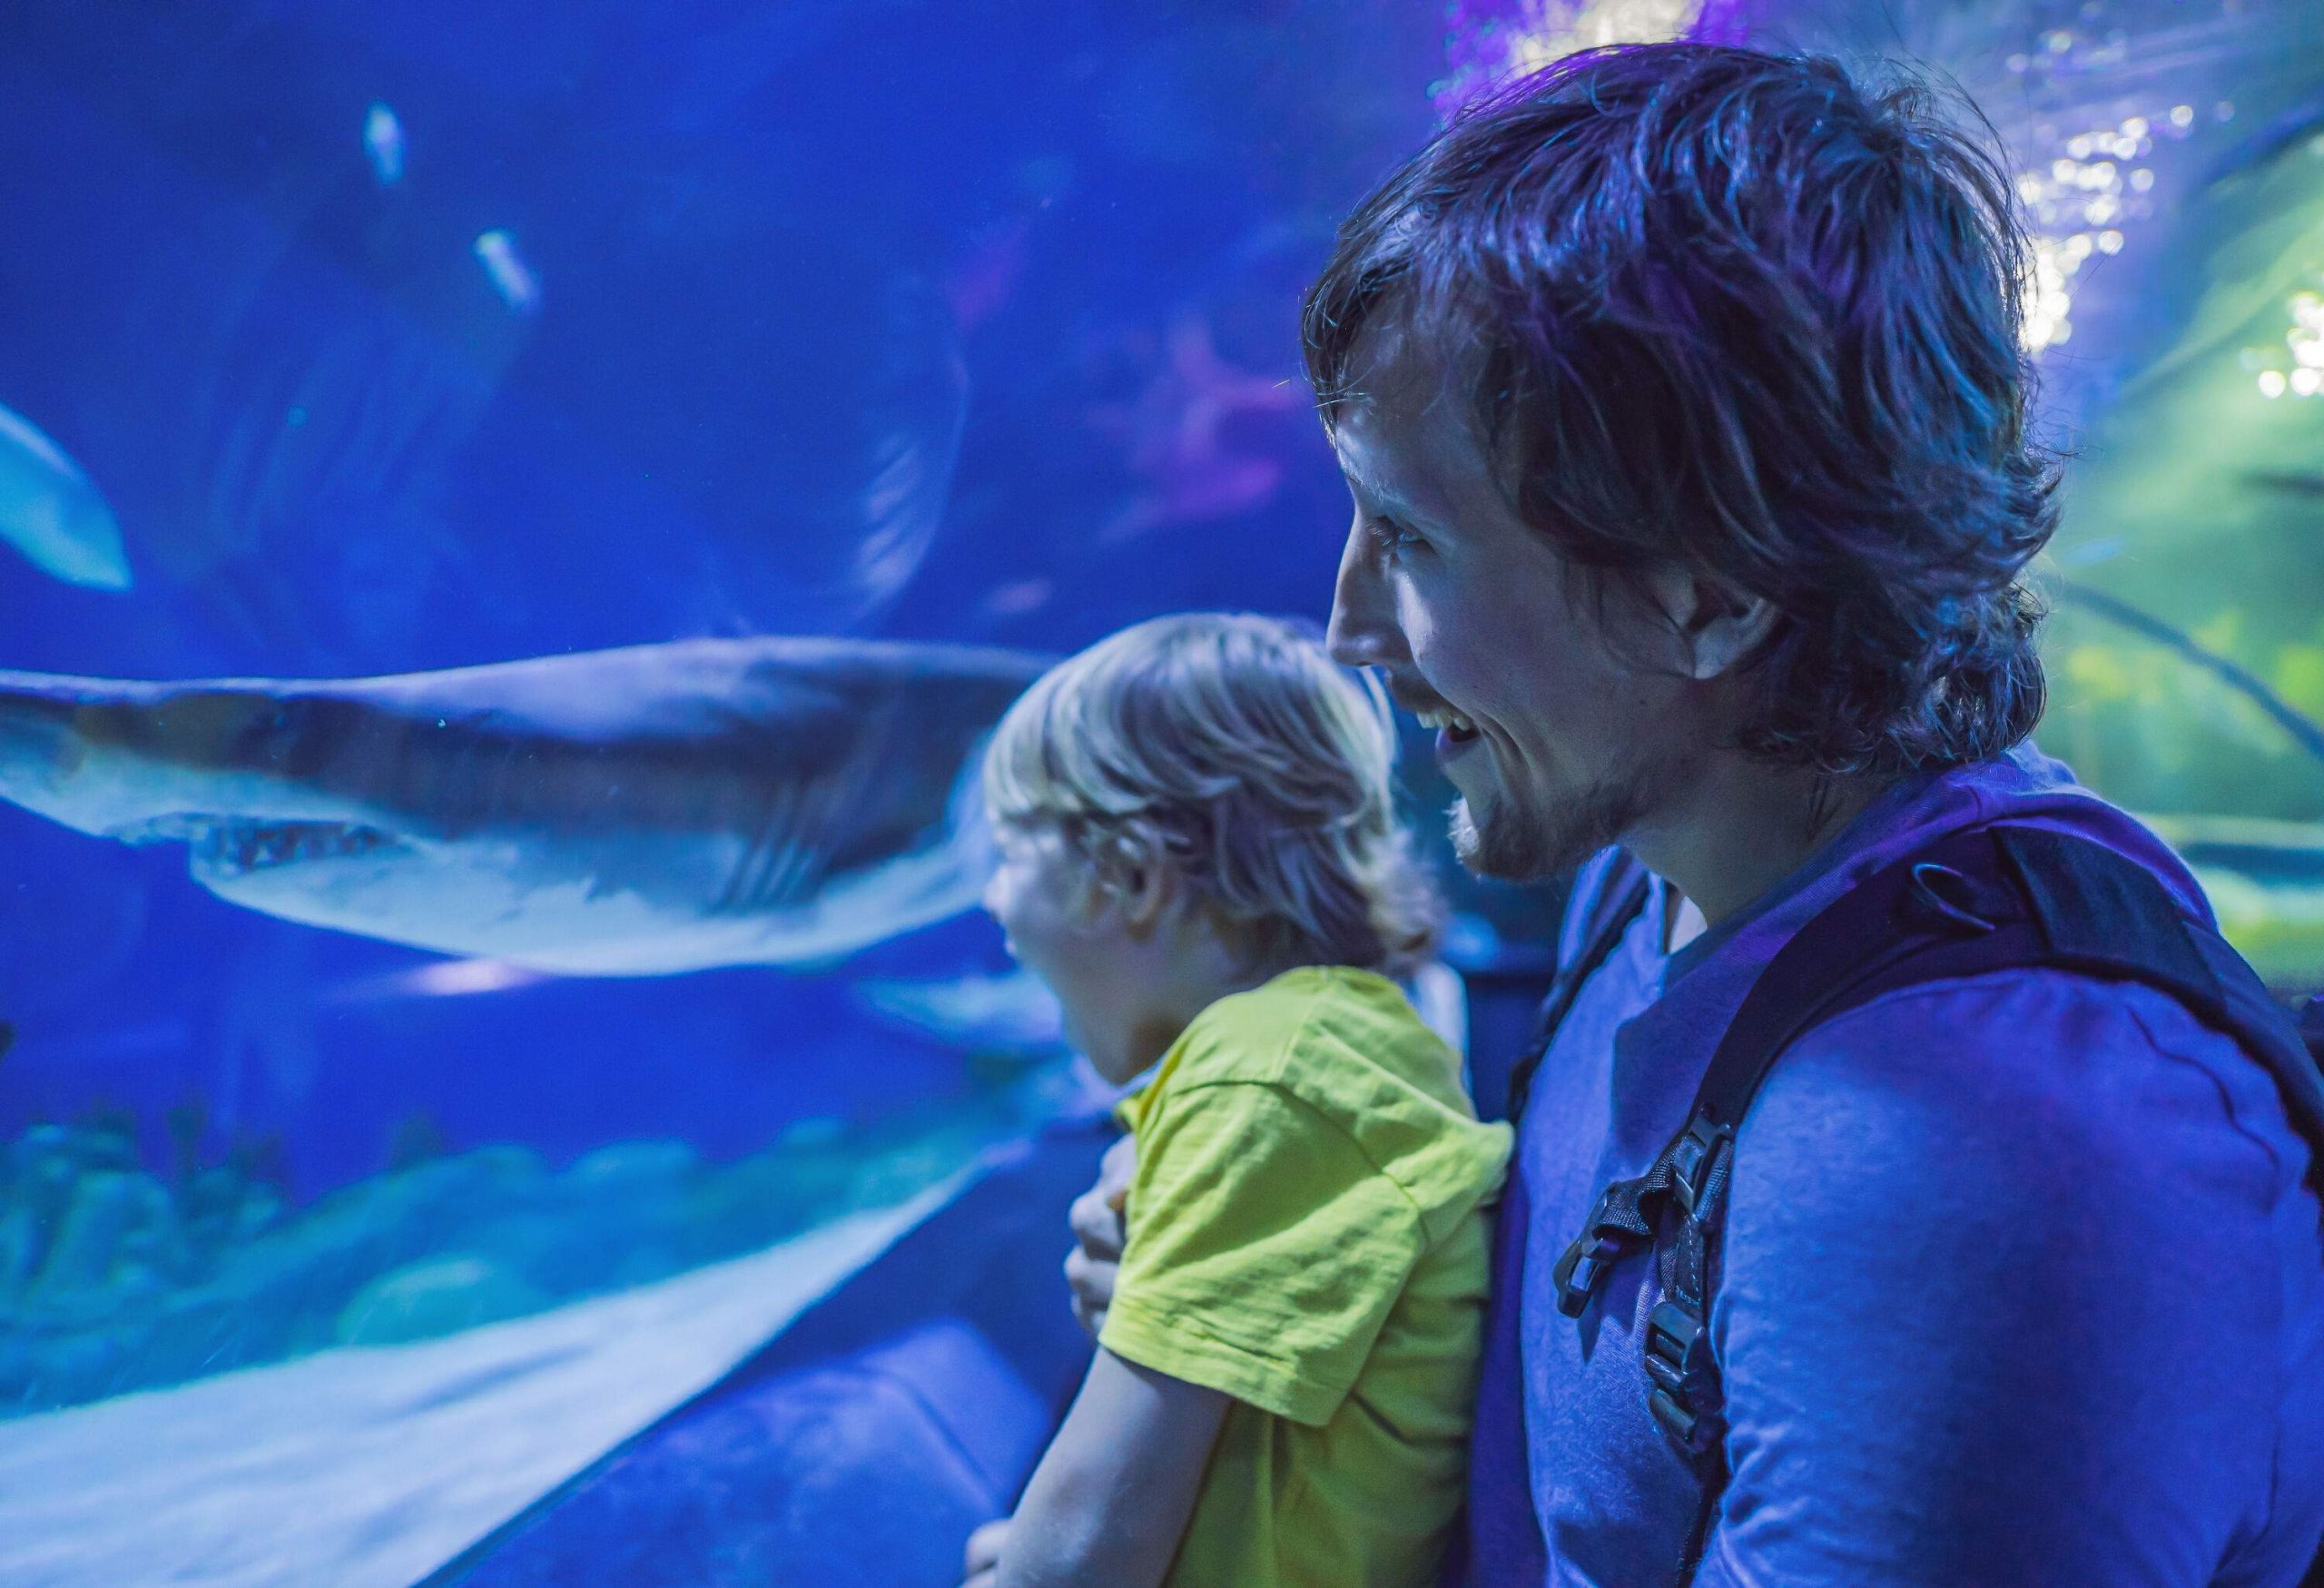 A father and son share a memorable bonding experience as they marvel at the fascinating aquatic life while standing within the immersive tunnel of an aquarium.